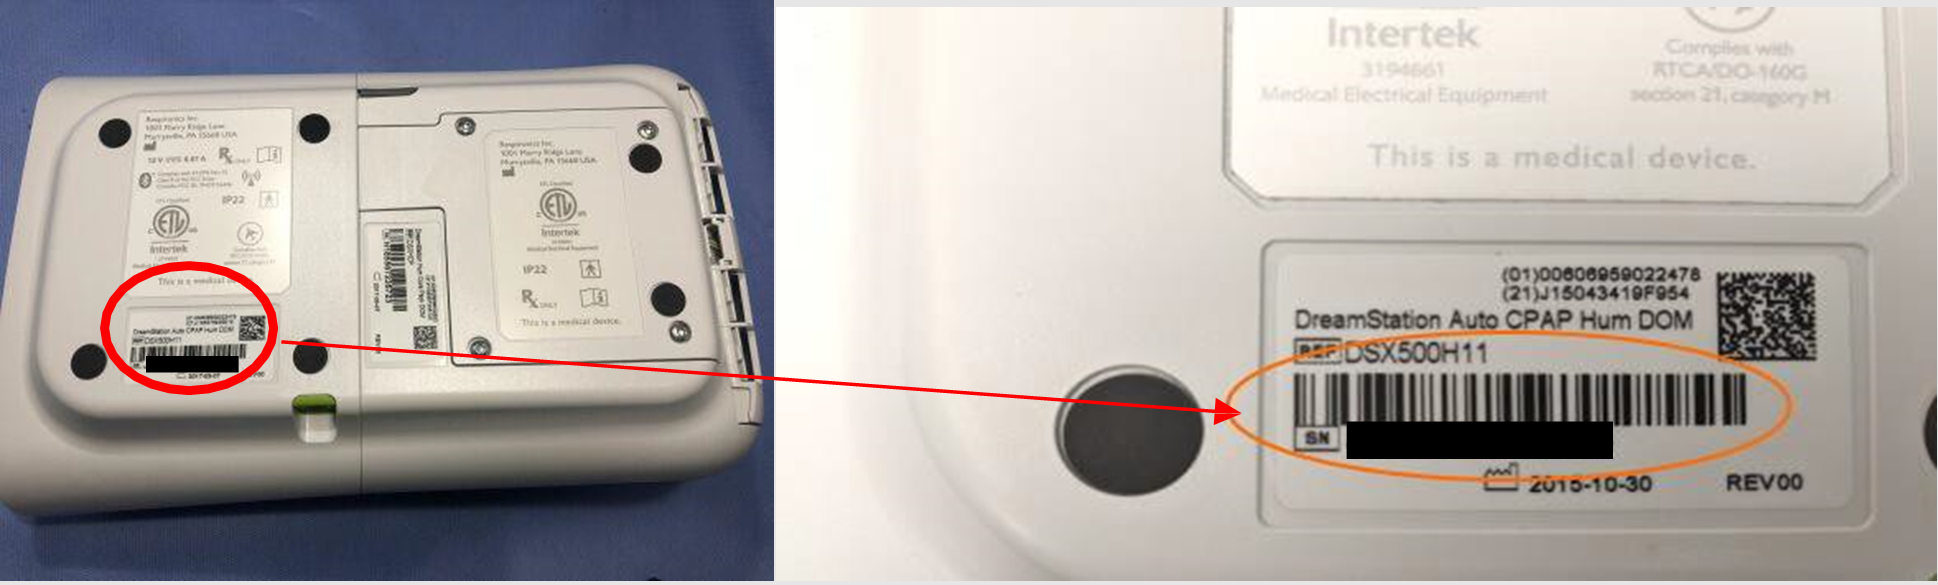 The bottom of a Philips Respironics DreamStation1 highlighting the location of the serial number.